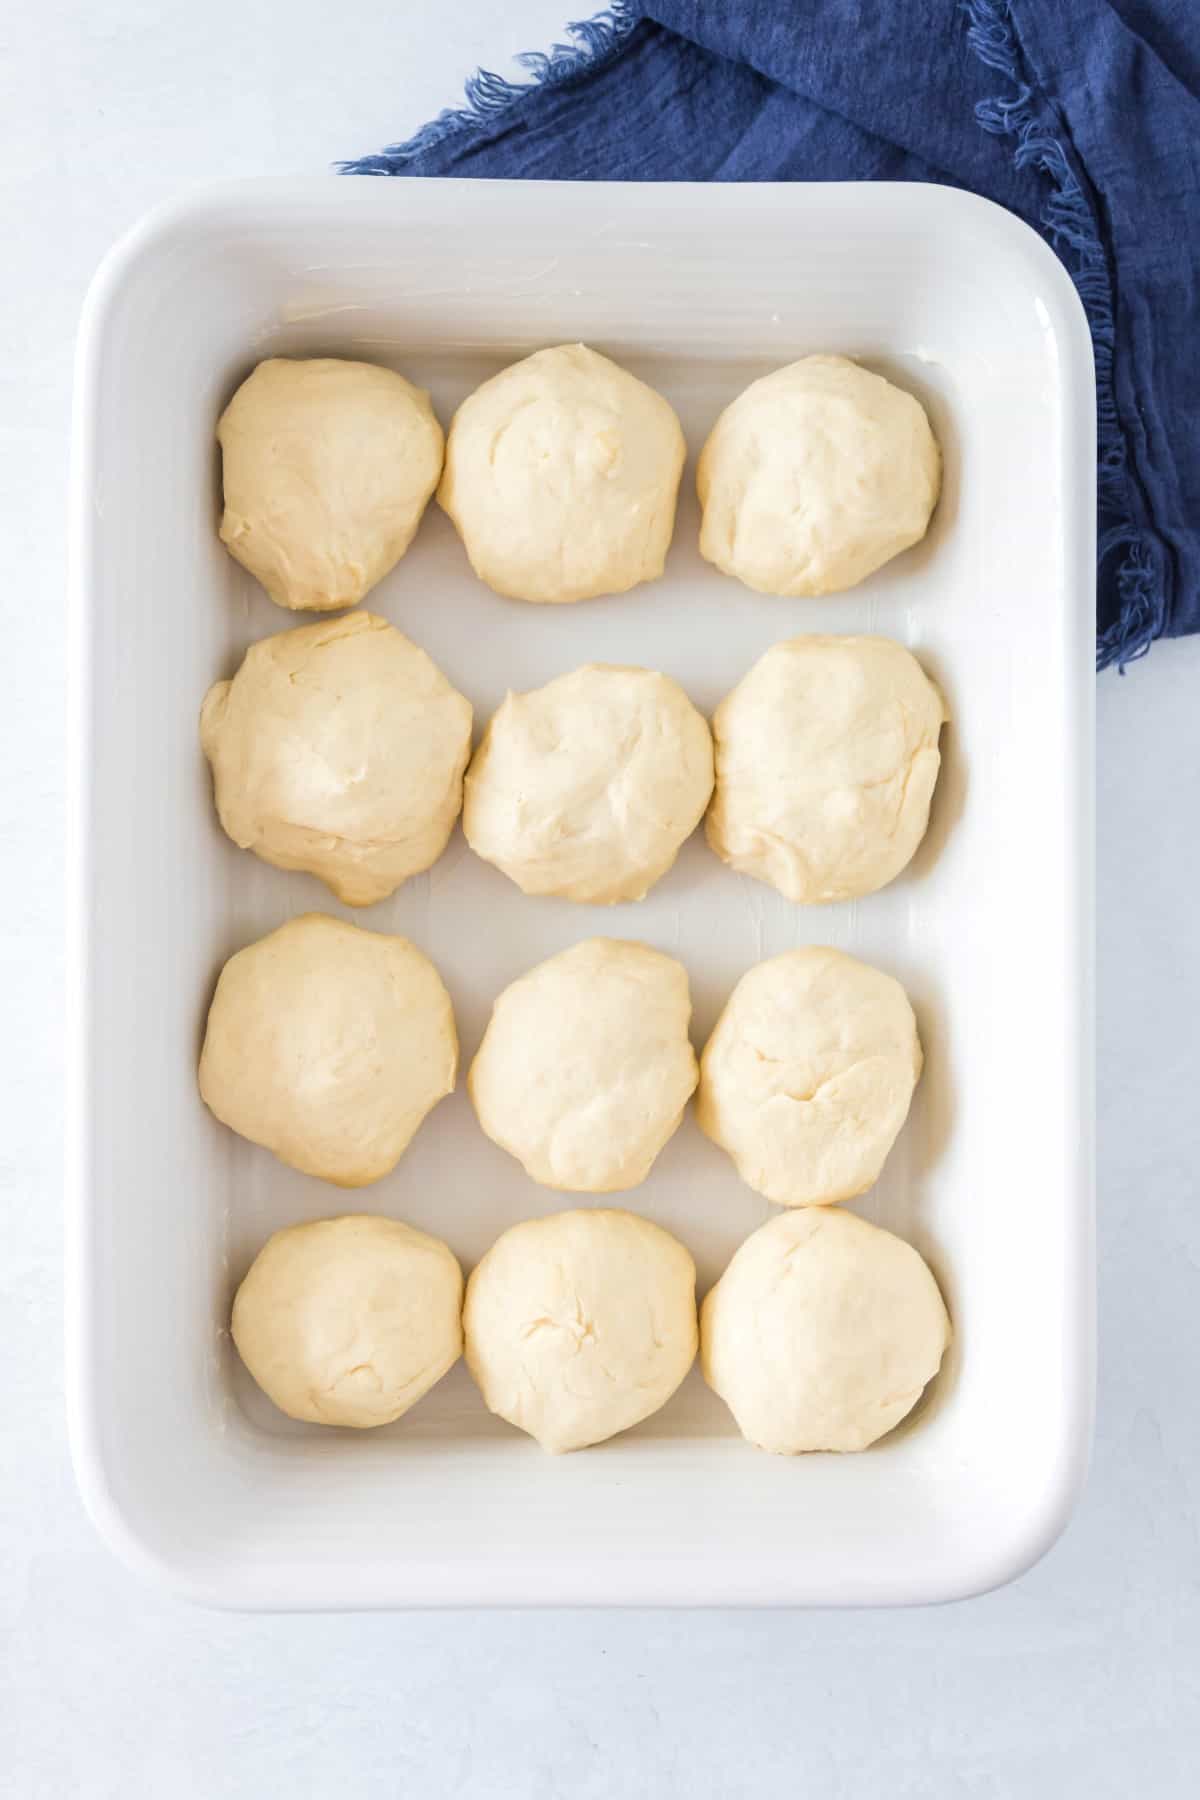 Rolls not proofed yet in a baking pan. 